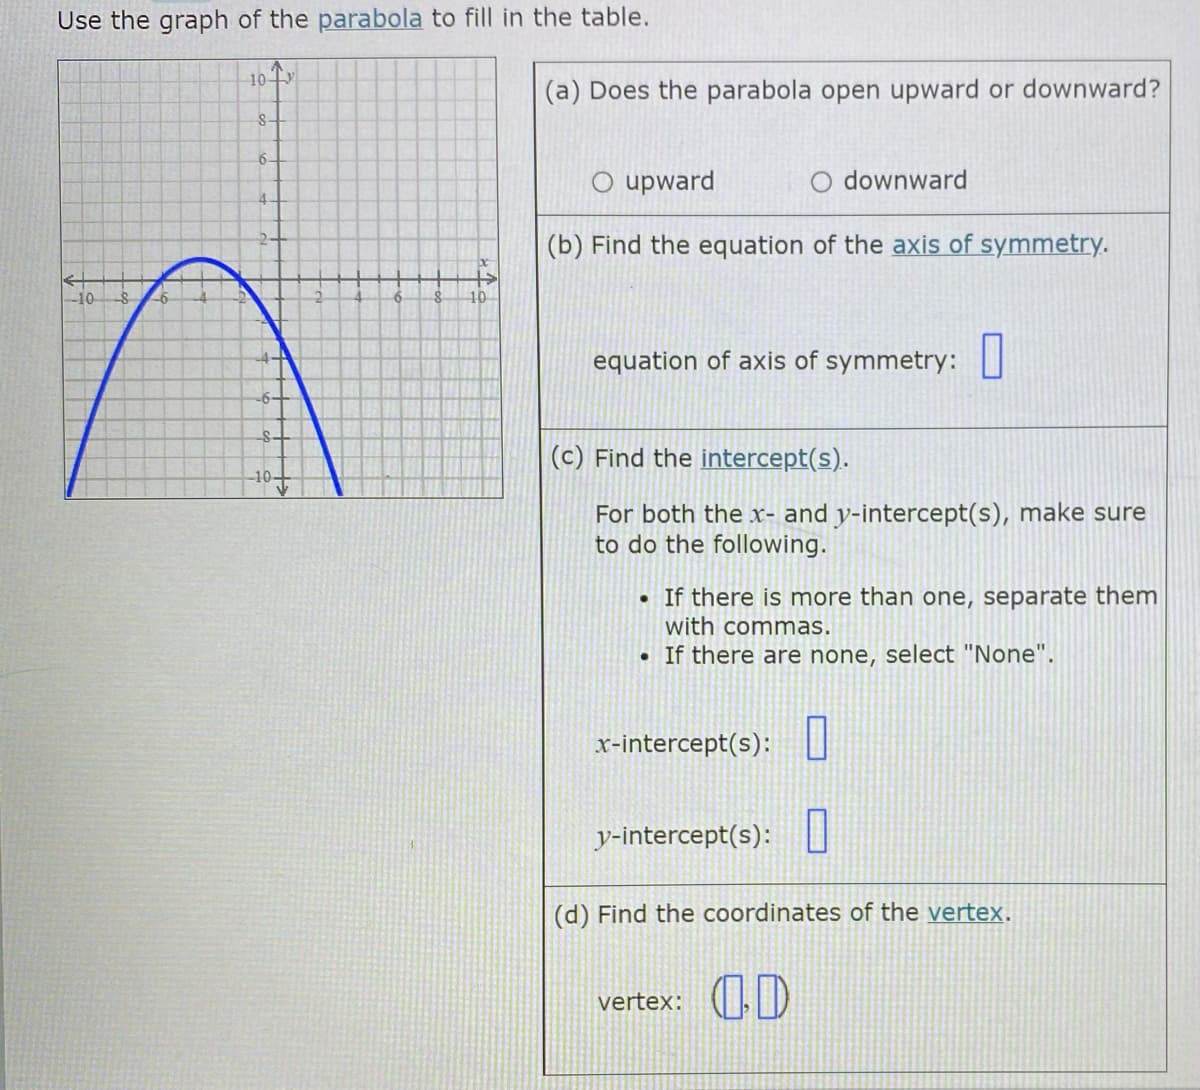 Use the graph of the parabola to fill in the table.
10 Tv
(a) Does the parabola open upward or downward?
S-
6-
O upward
O downward
4-
(b) Find the equation of the axis of symmetry.
10
-6
equation of axis of symmetry:U
-6-
(c) Find the intercept(s).
For both the x- and y-intercept(s), make sure
to do the following.
• If there is more than one, separate them
with commas.
• If there are none, select "None".
x-intercept(s):U
y-intercept(s):I
(d) Find the coordinates of the vertex.
vertex: ()
